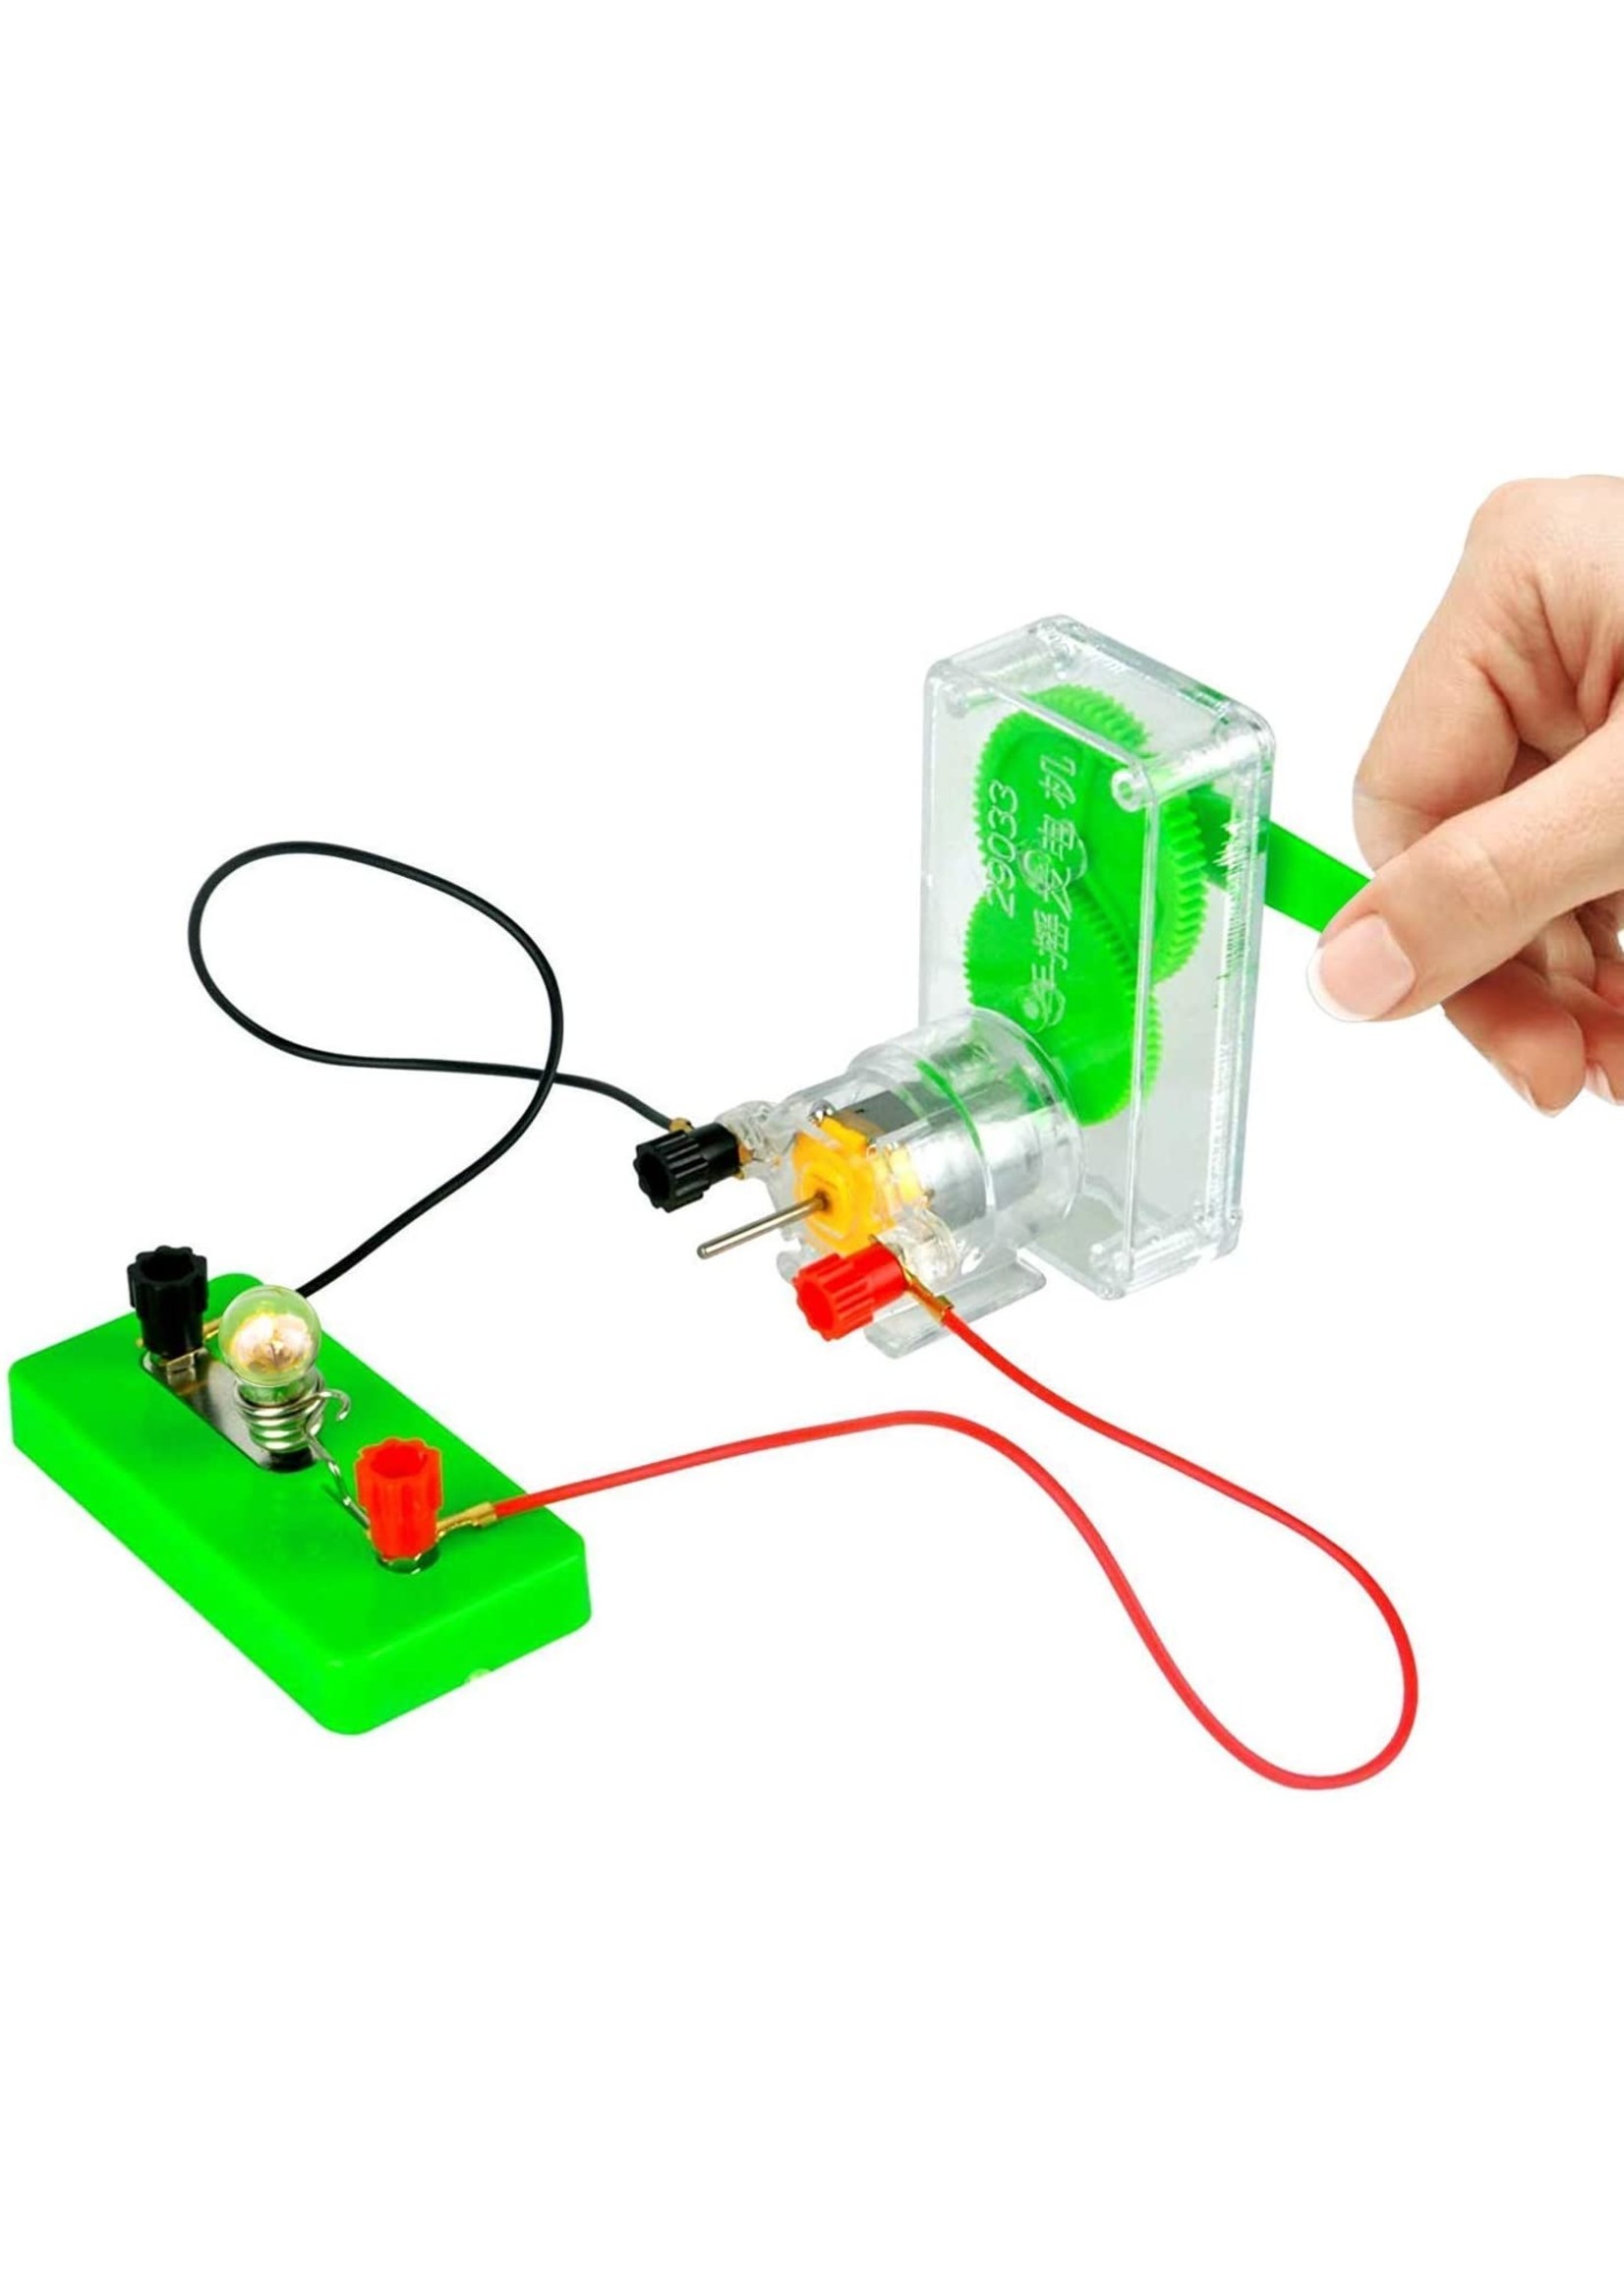 Kids Science Lab Learning Kit (Electricity)